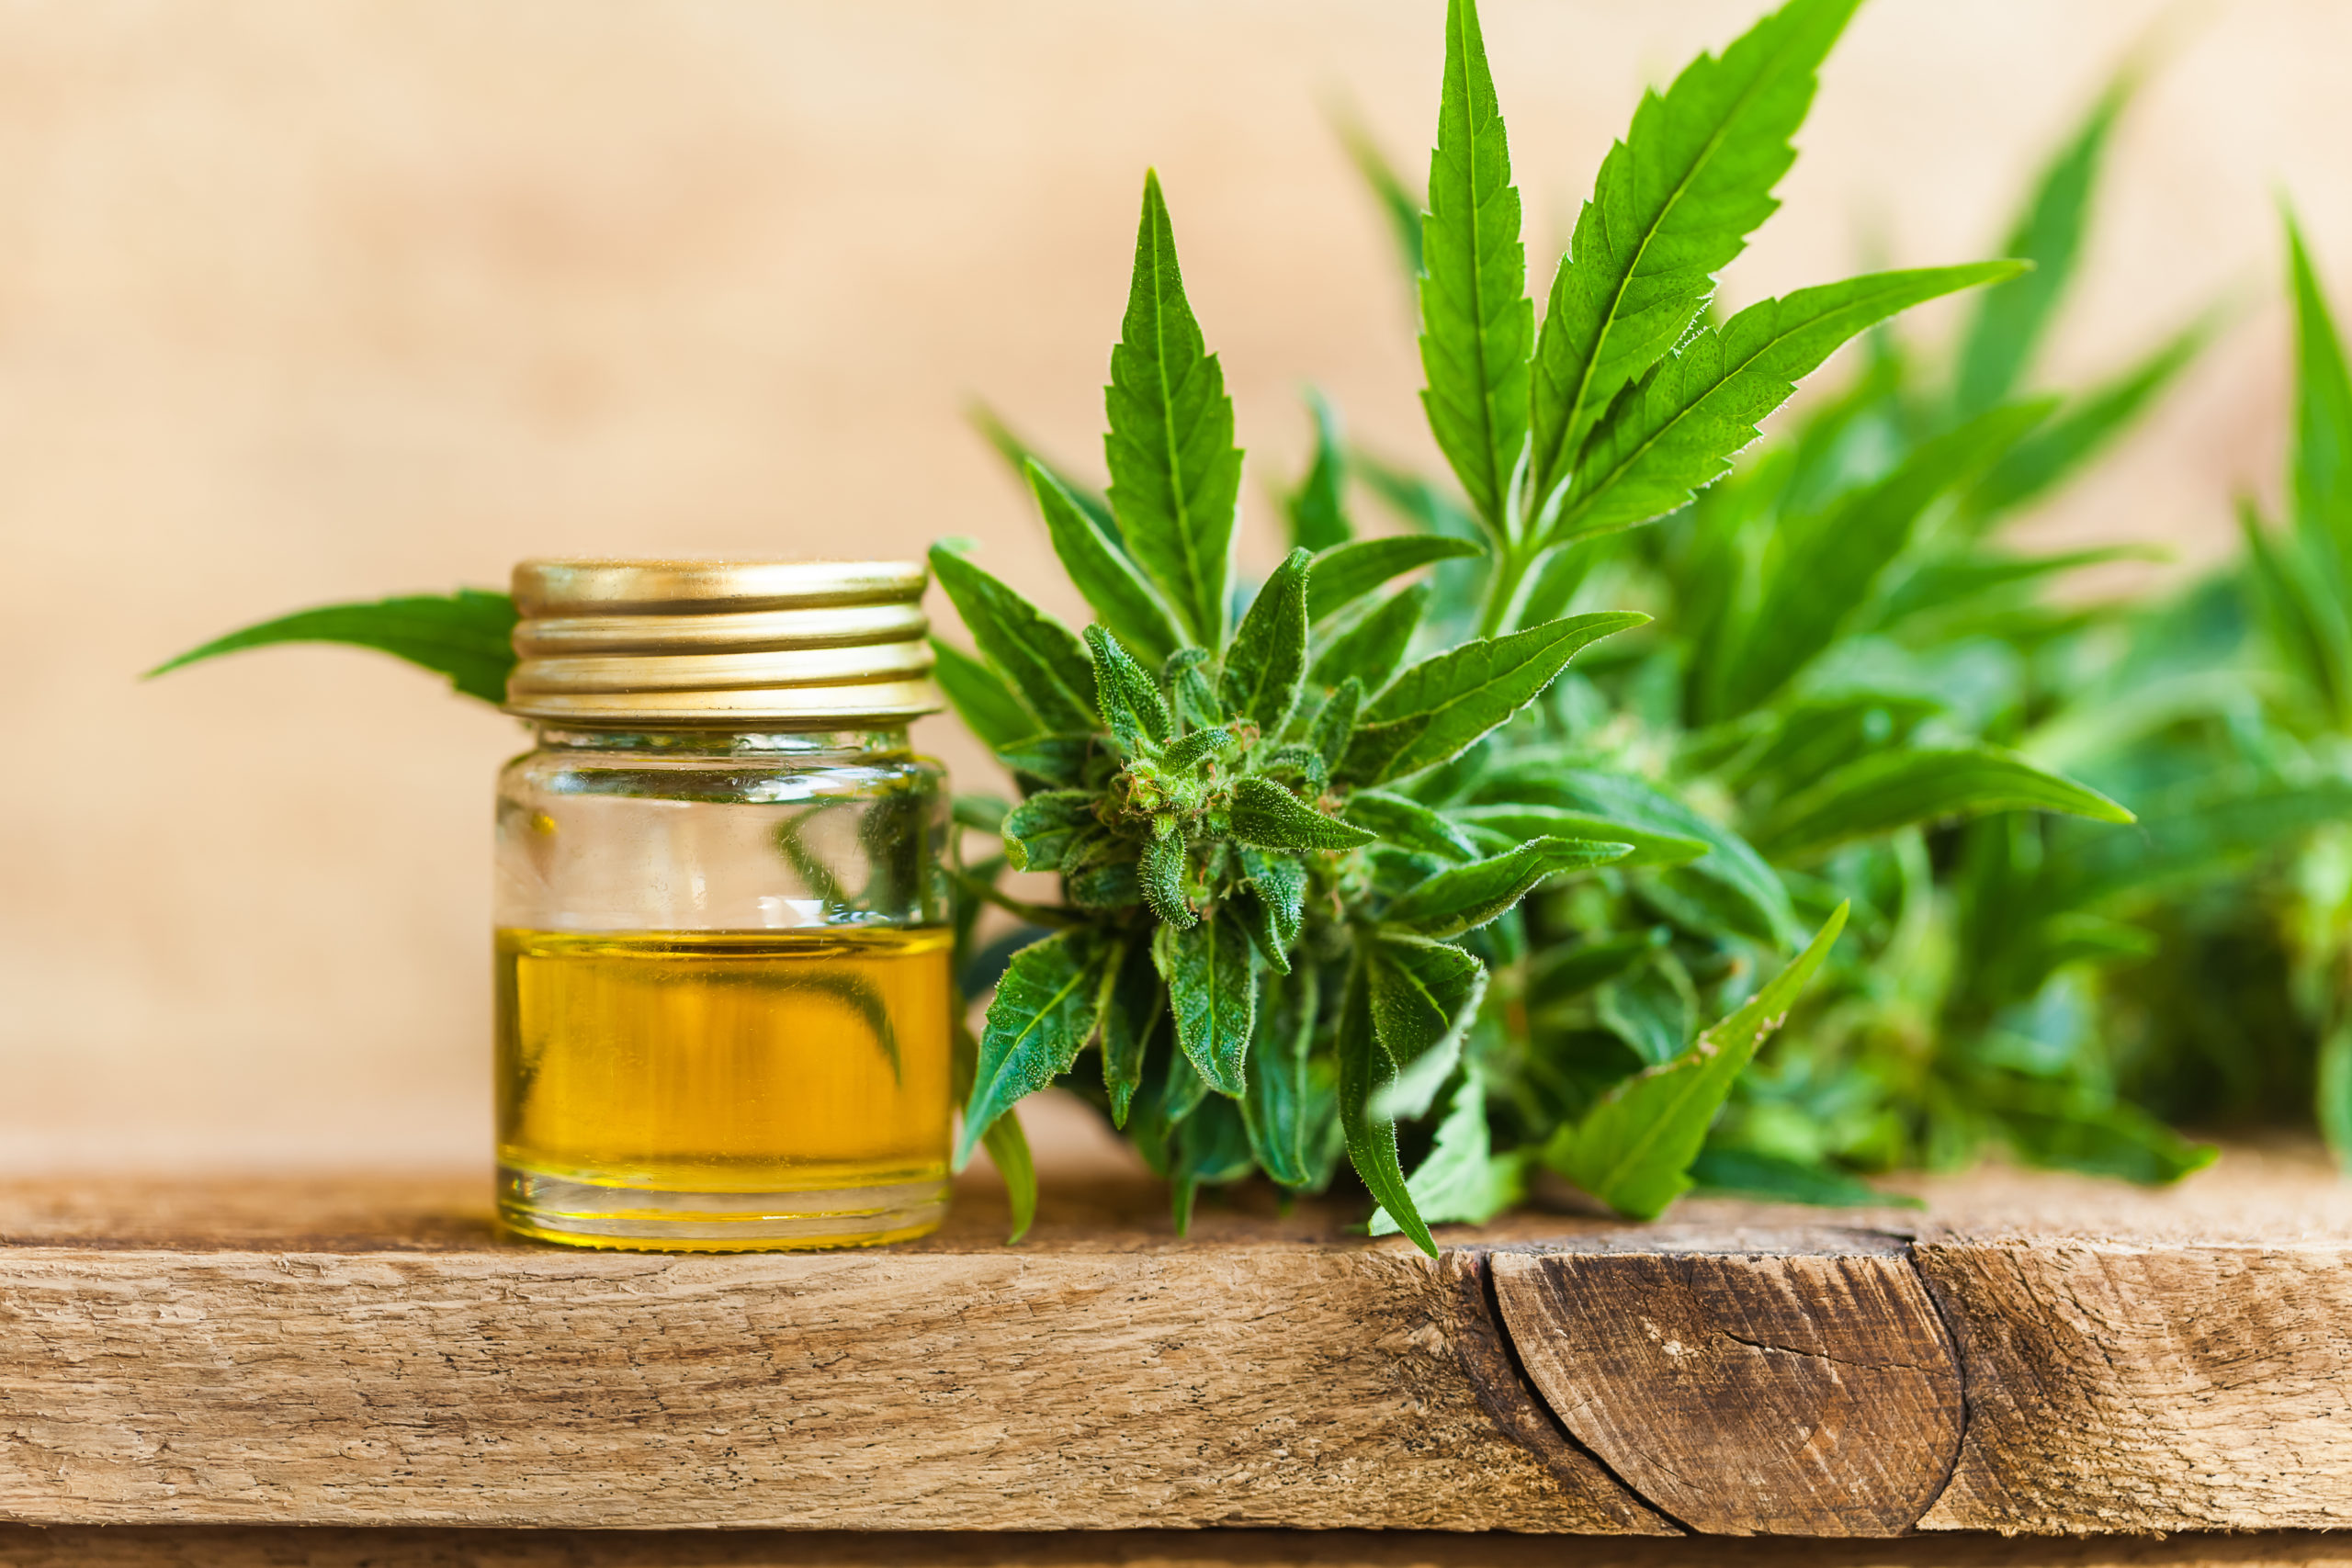 What Are The Various Significances Of Using Cannabinoid Oil?